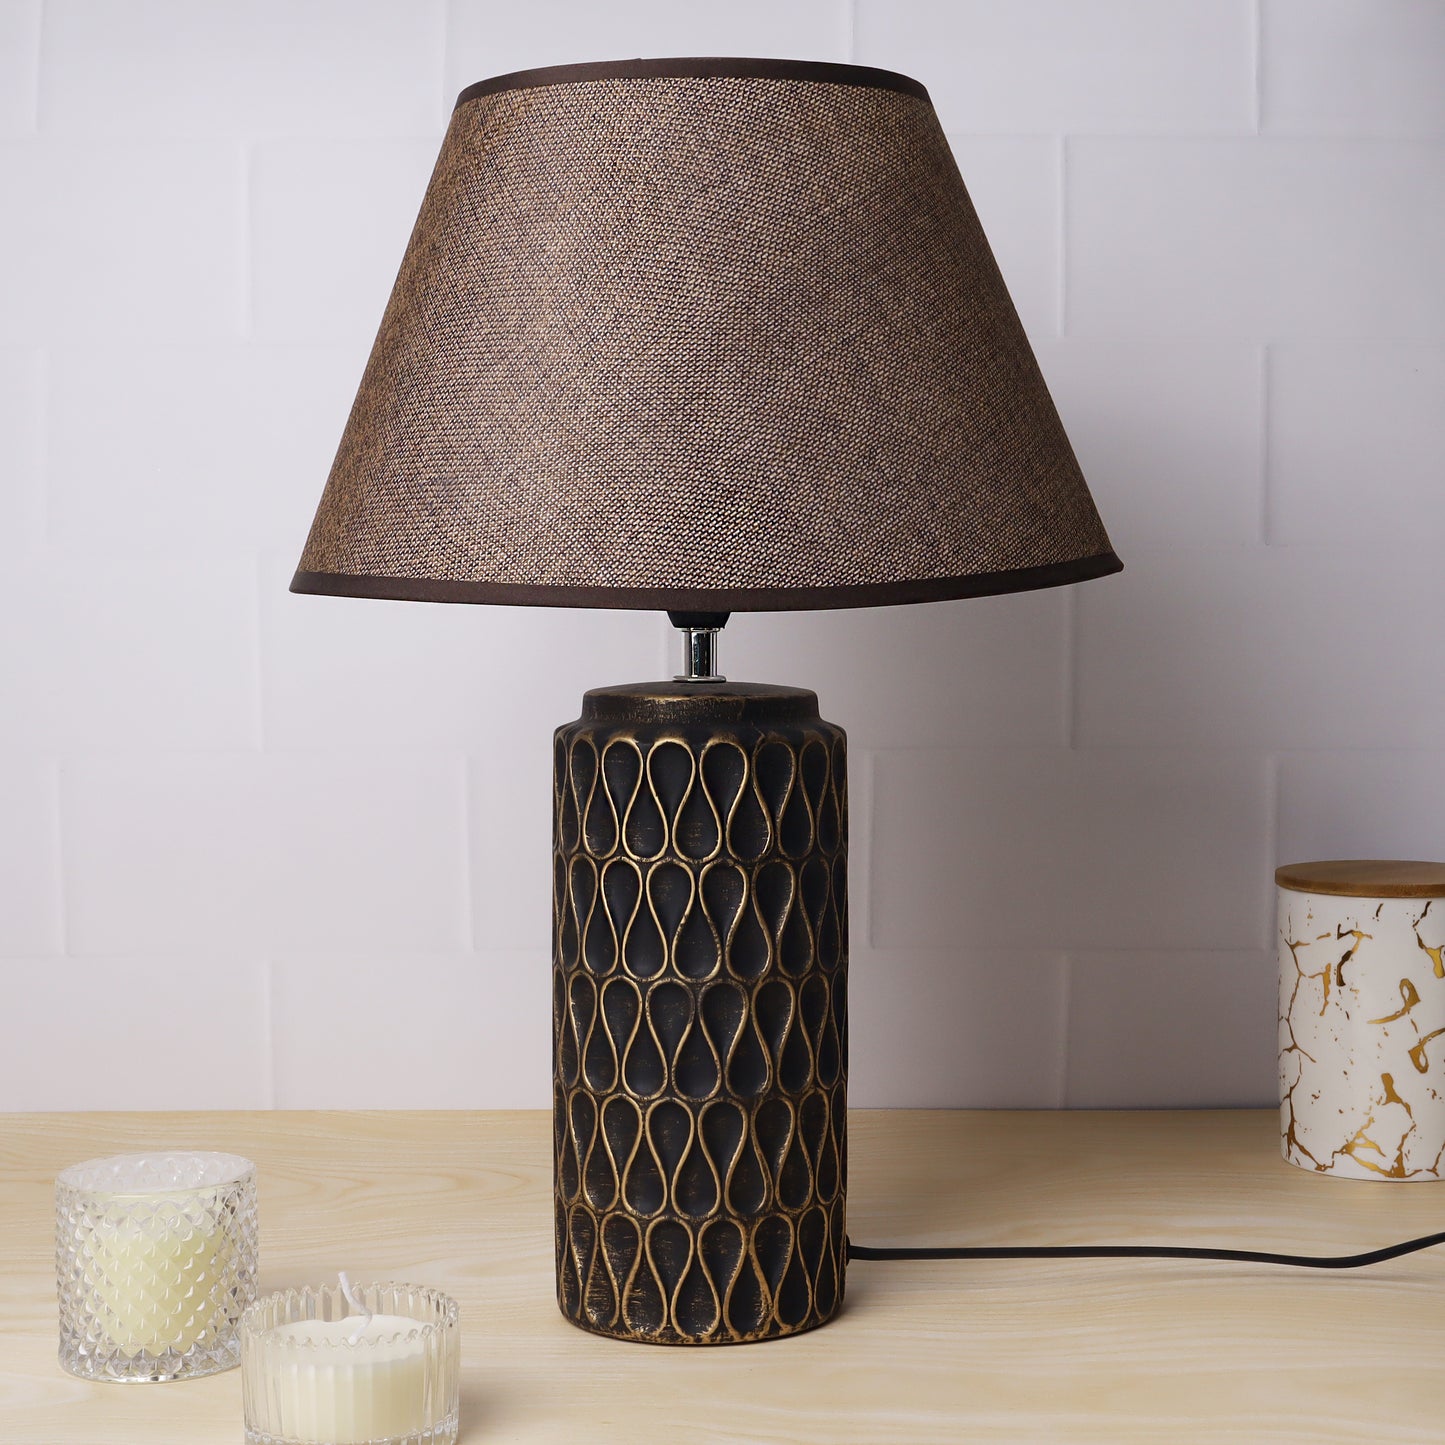  ceramic table lamp with textured base and linen shade, illuminating warmth and elegance